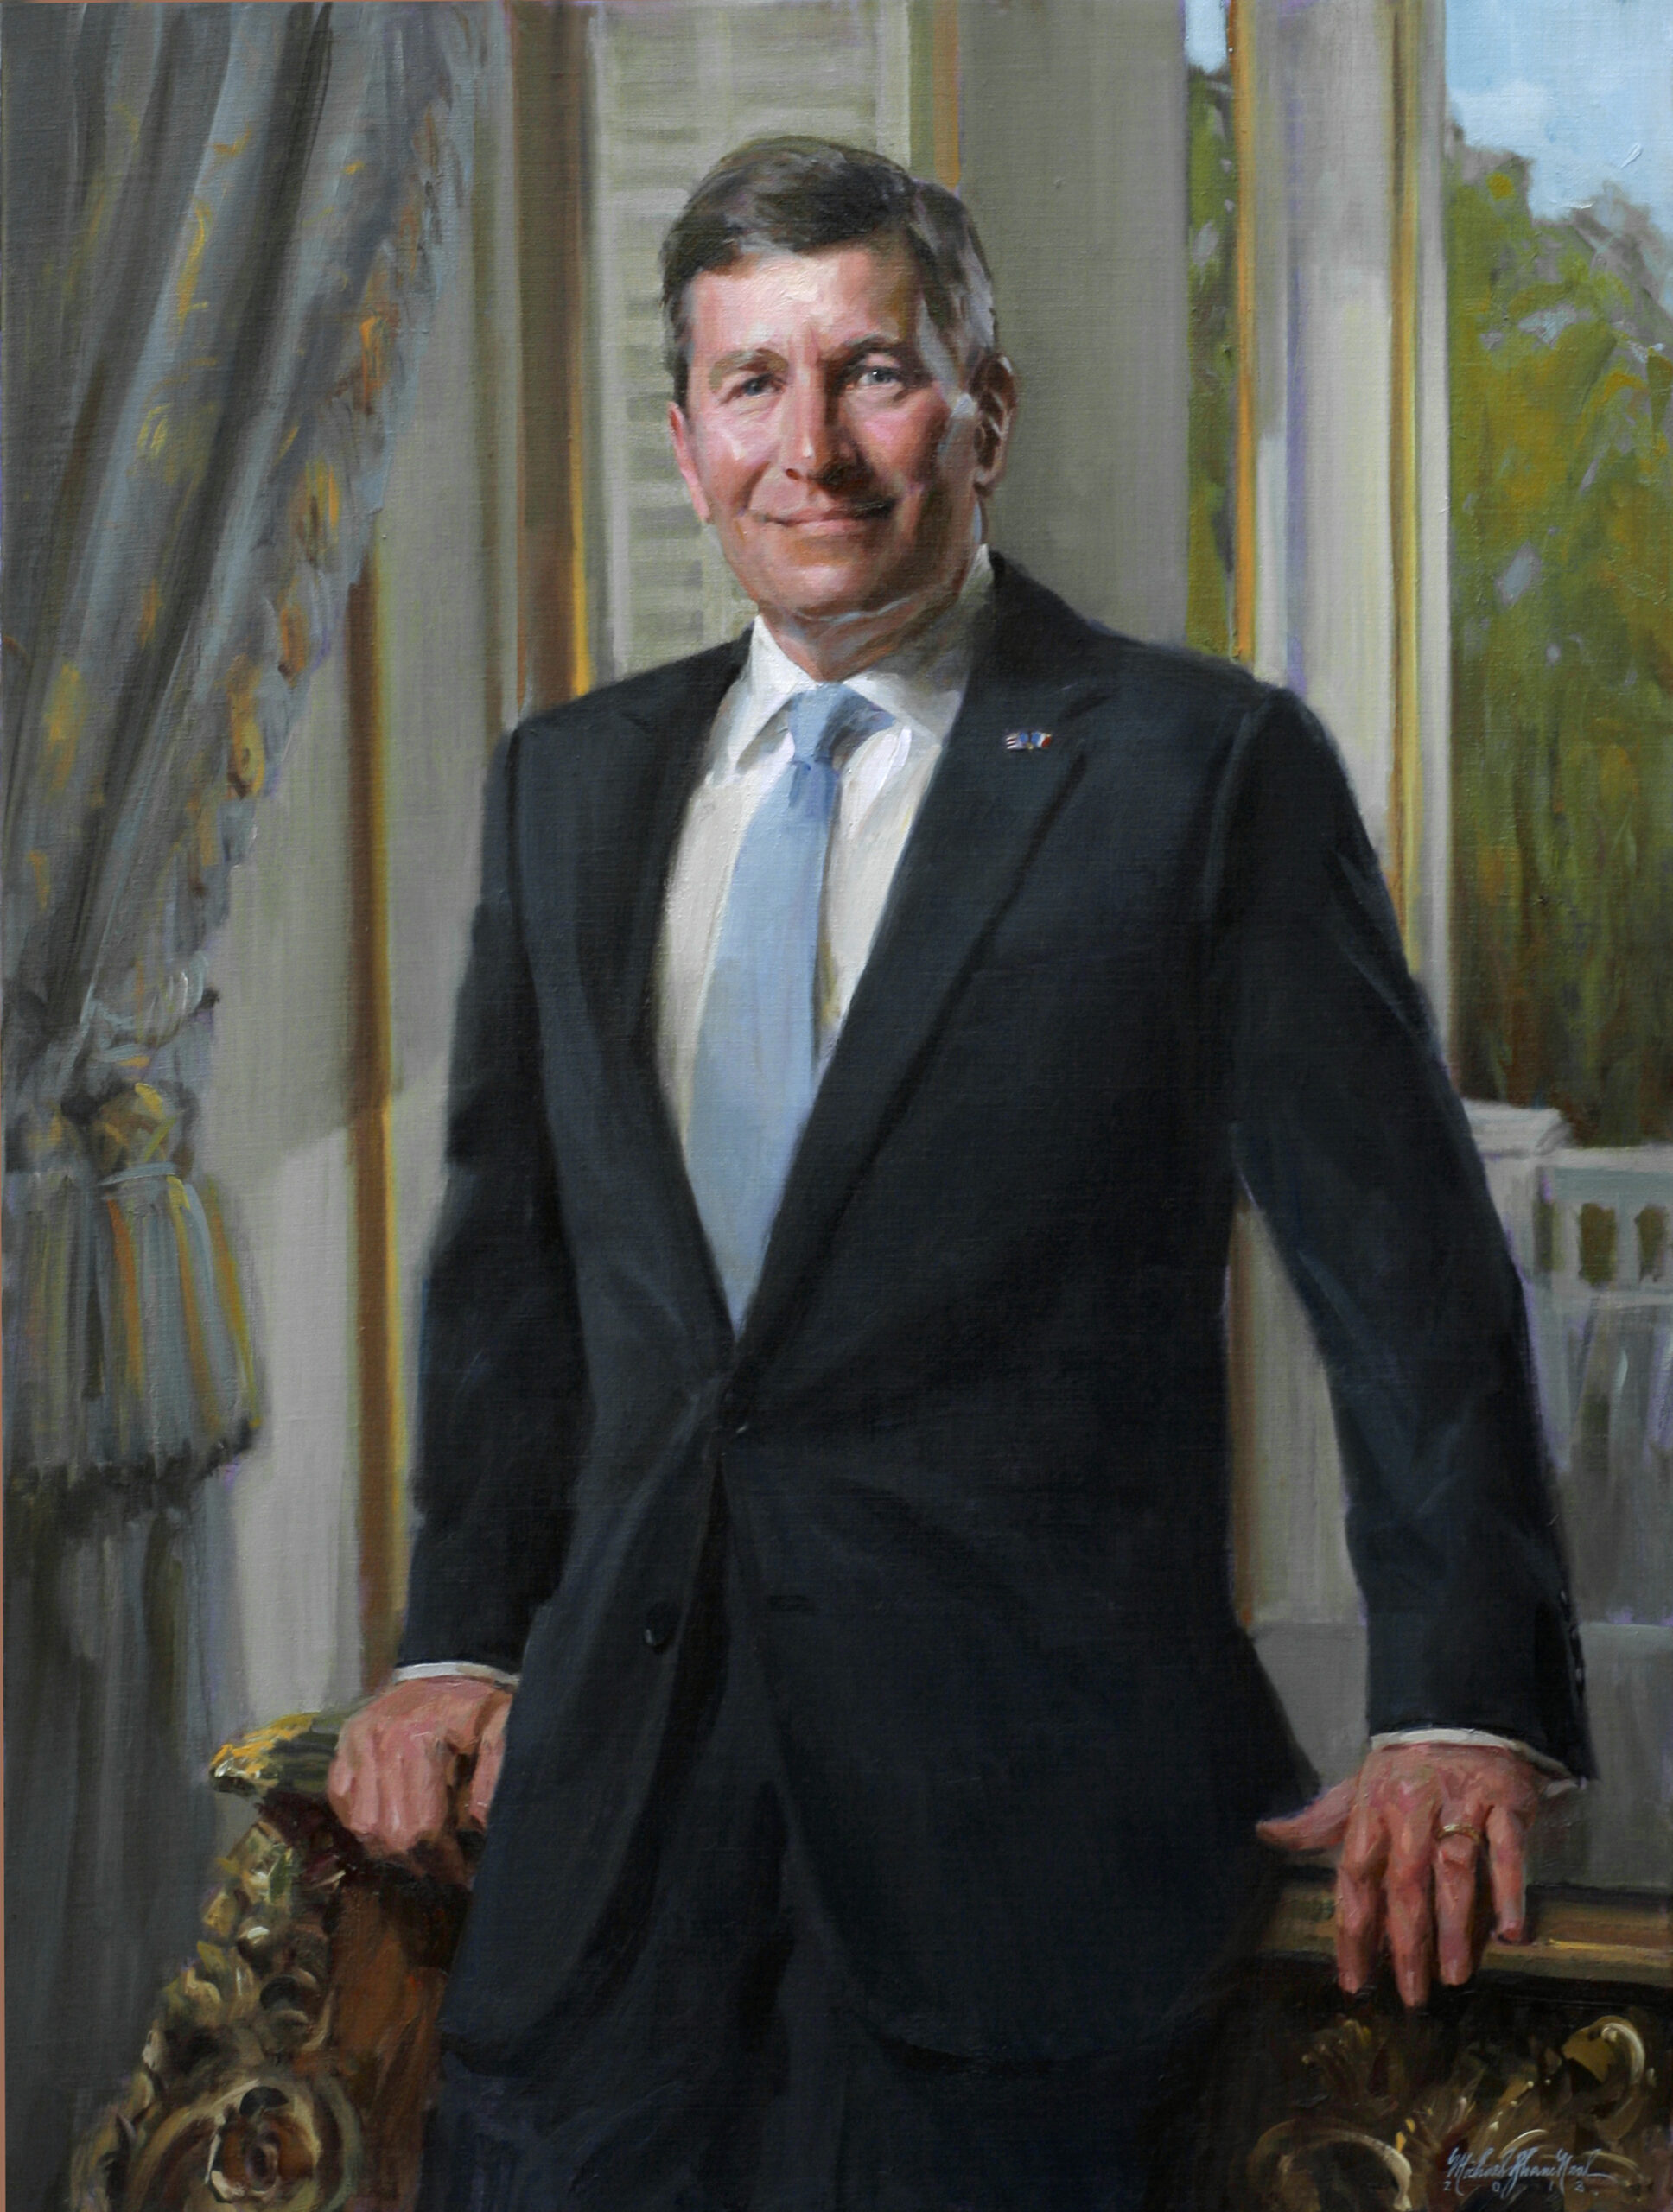 Ambassador Charles Rivkin, United States Ambassador to France, Collection of the United States Embassy, Paris, France, 30" x 40", oil on canvas, by Michael Shane Neal